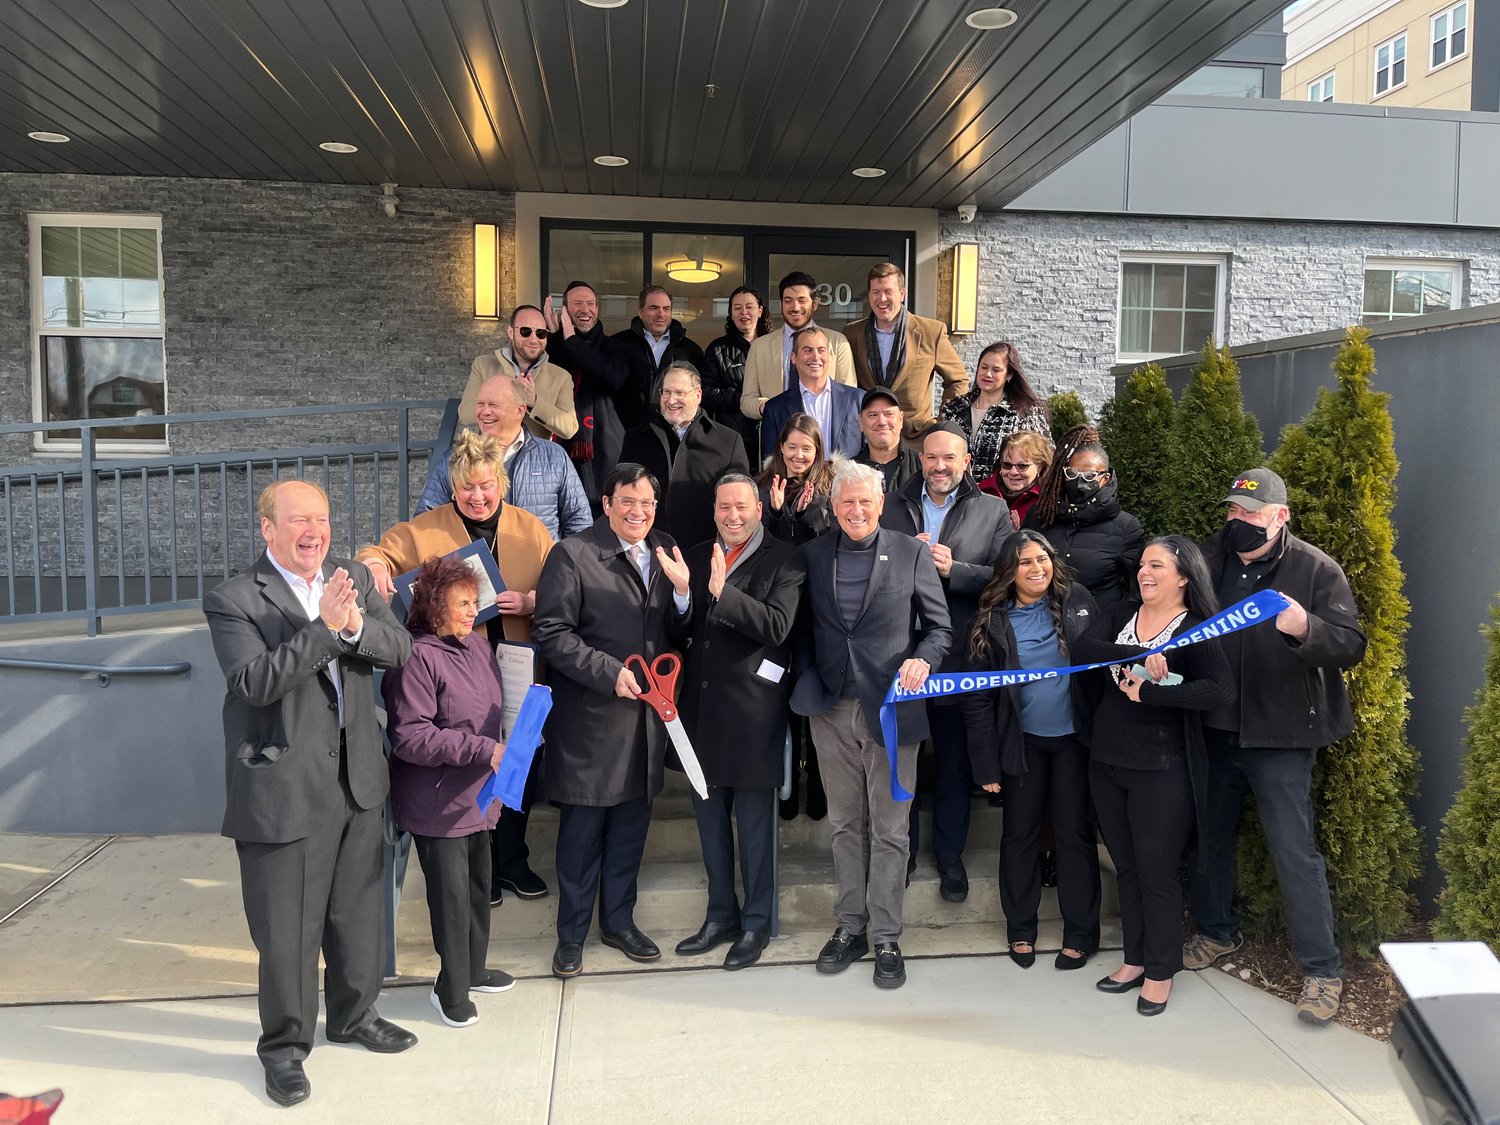 Esplanade owners and operators Alexander and David Scharf cut the grand opening ribbon for Esplande senior community in Woodmere on Jan. 18.